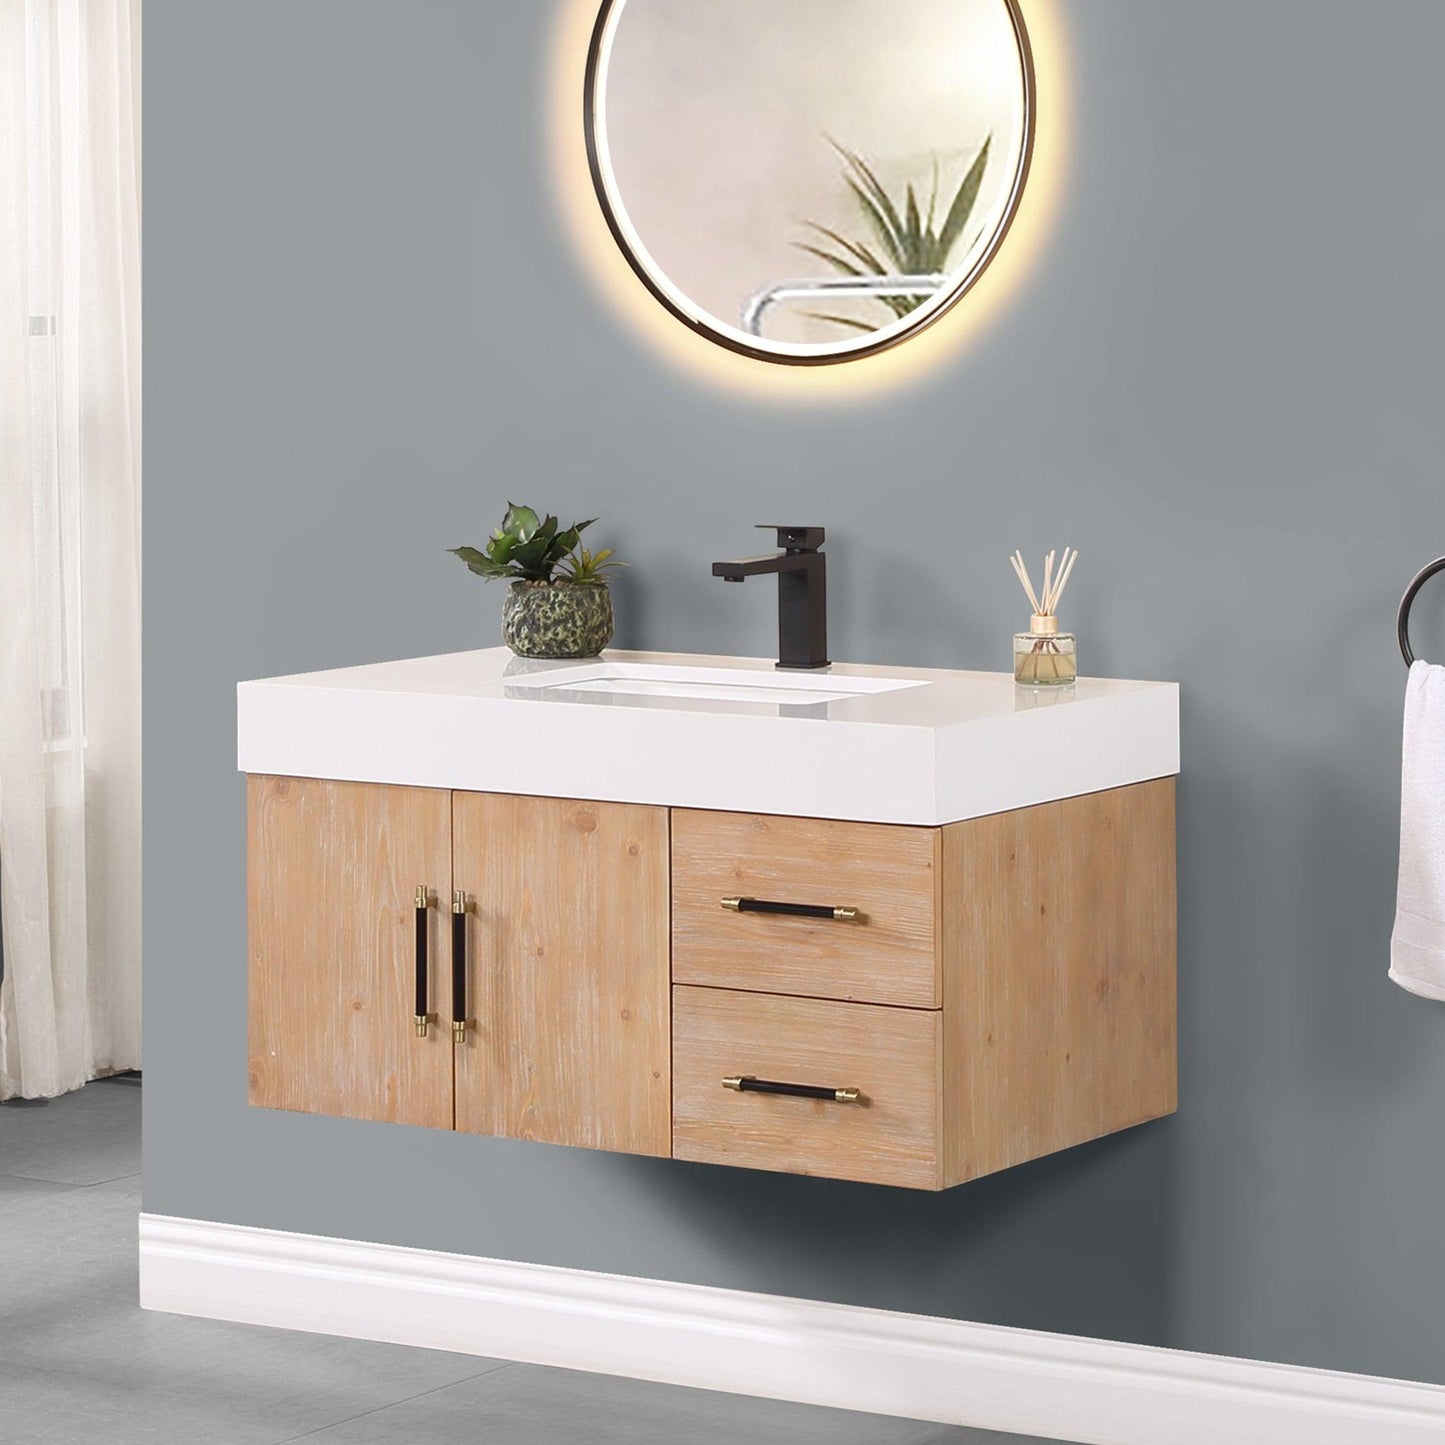 Altair Corchia 36" Light Brown Wall-Mounted Single Bathroom Vanity Set With White Composite Stone Top, Single Rectangular Undermount Ceramic Sink, and Overflow